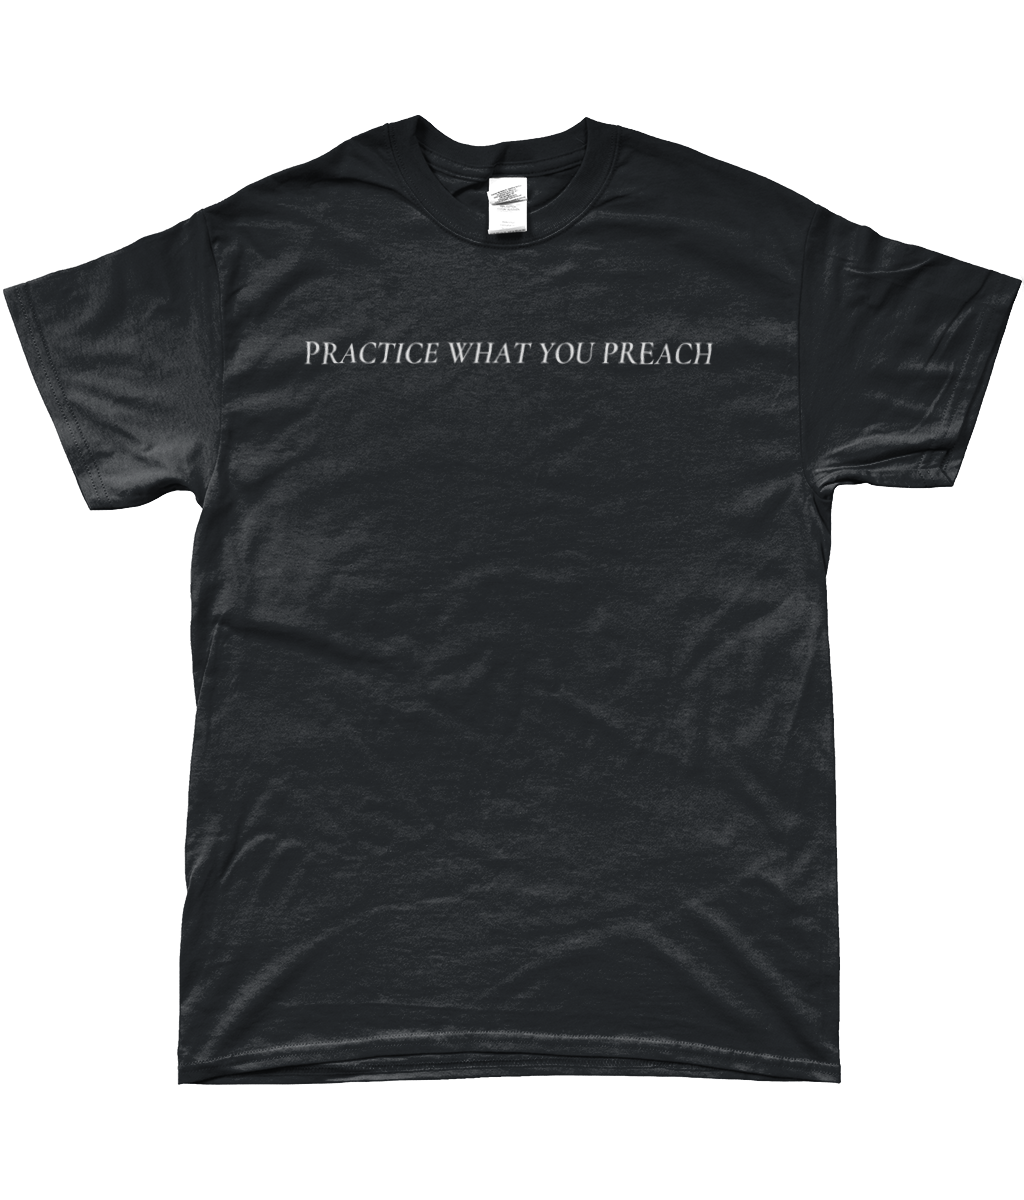 PRACTICE WHAT YOU PREACH T-SHIRT